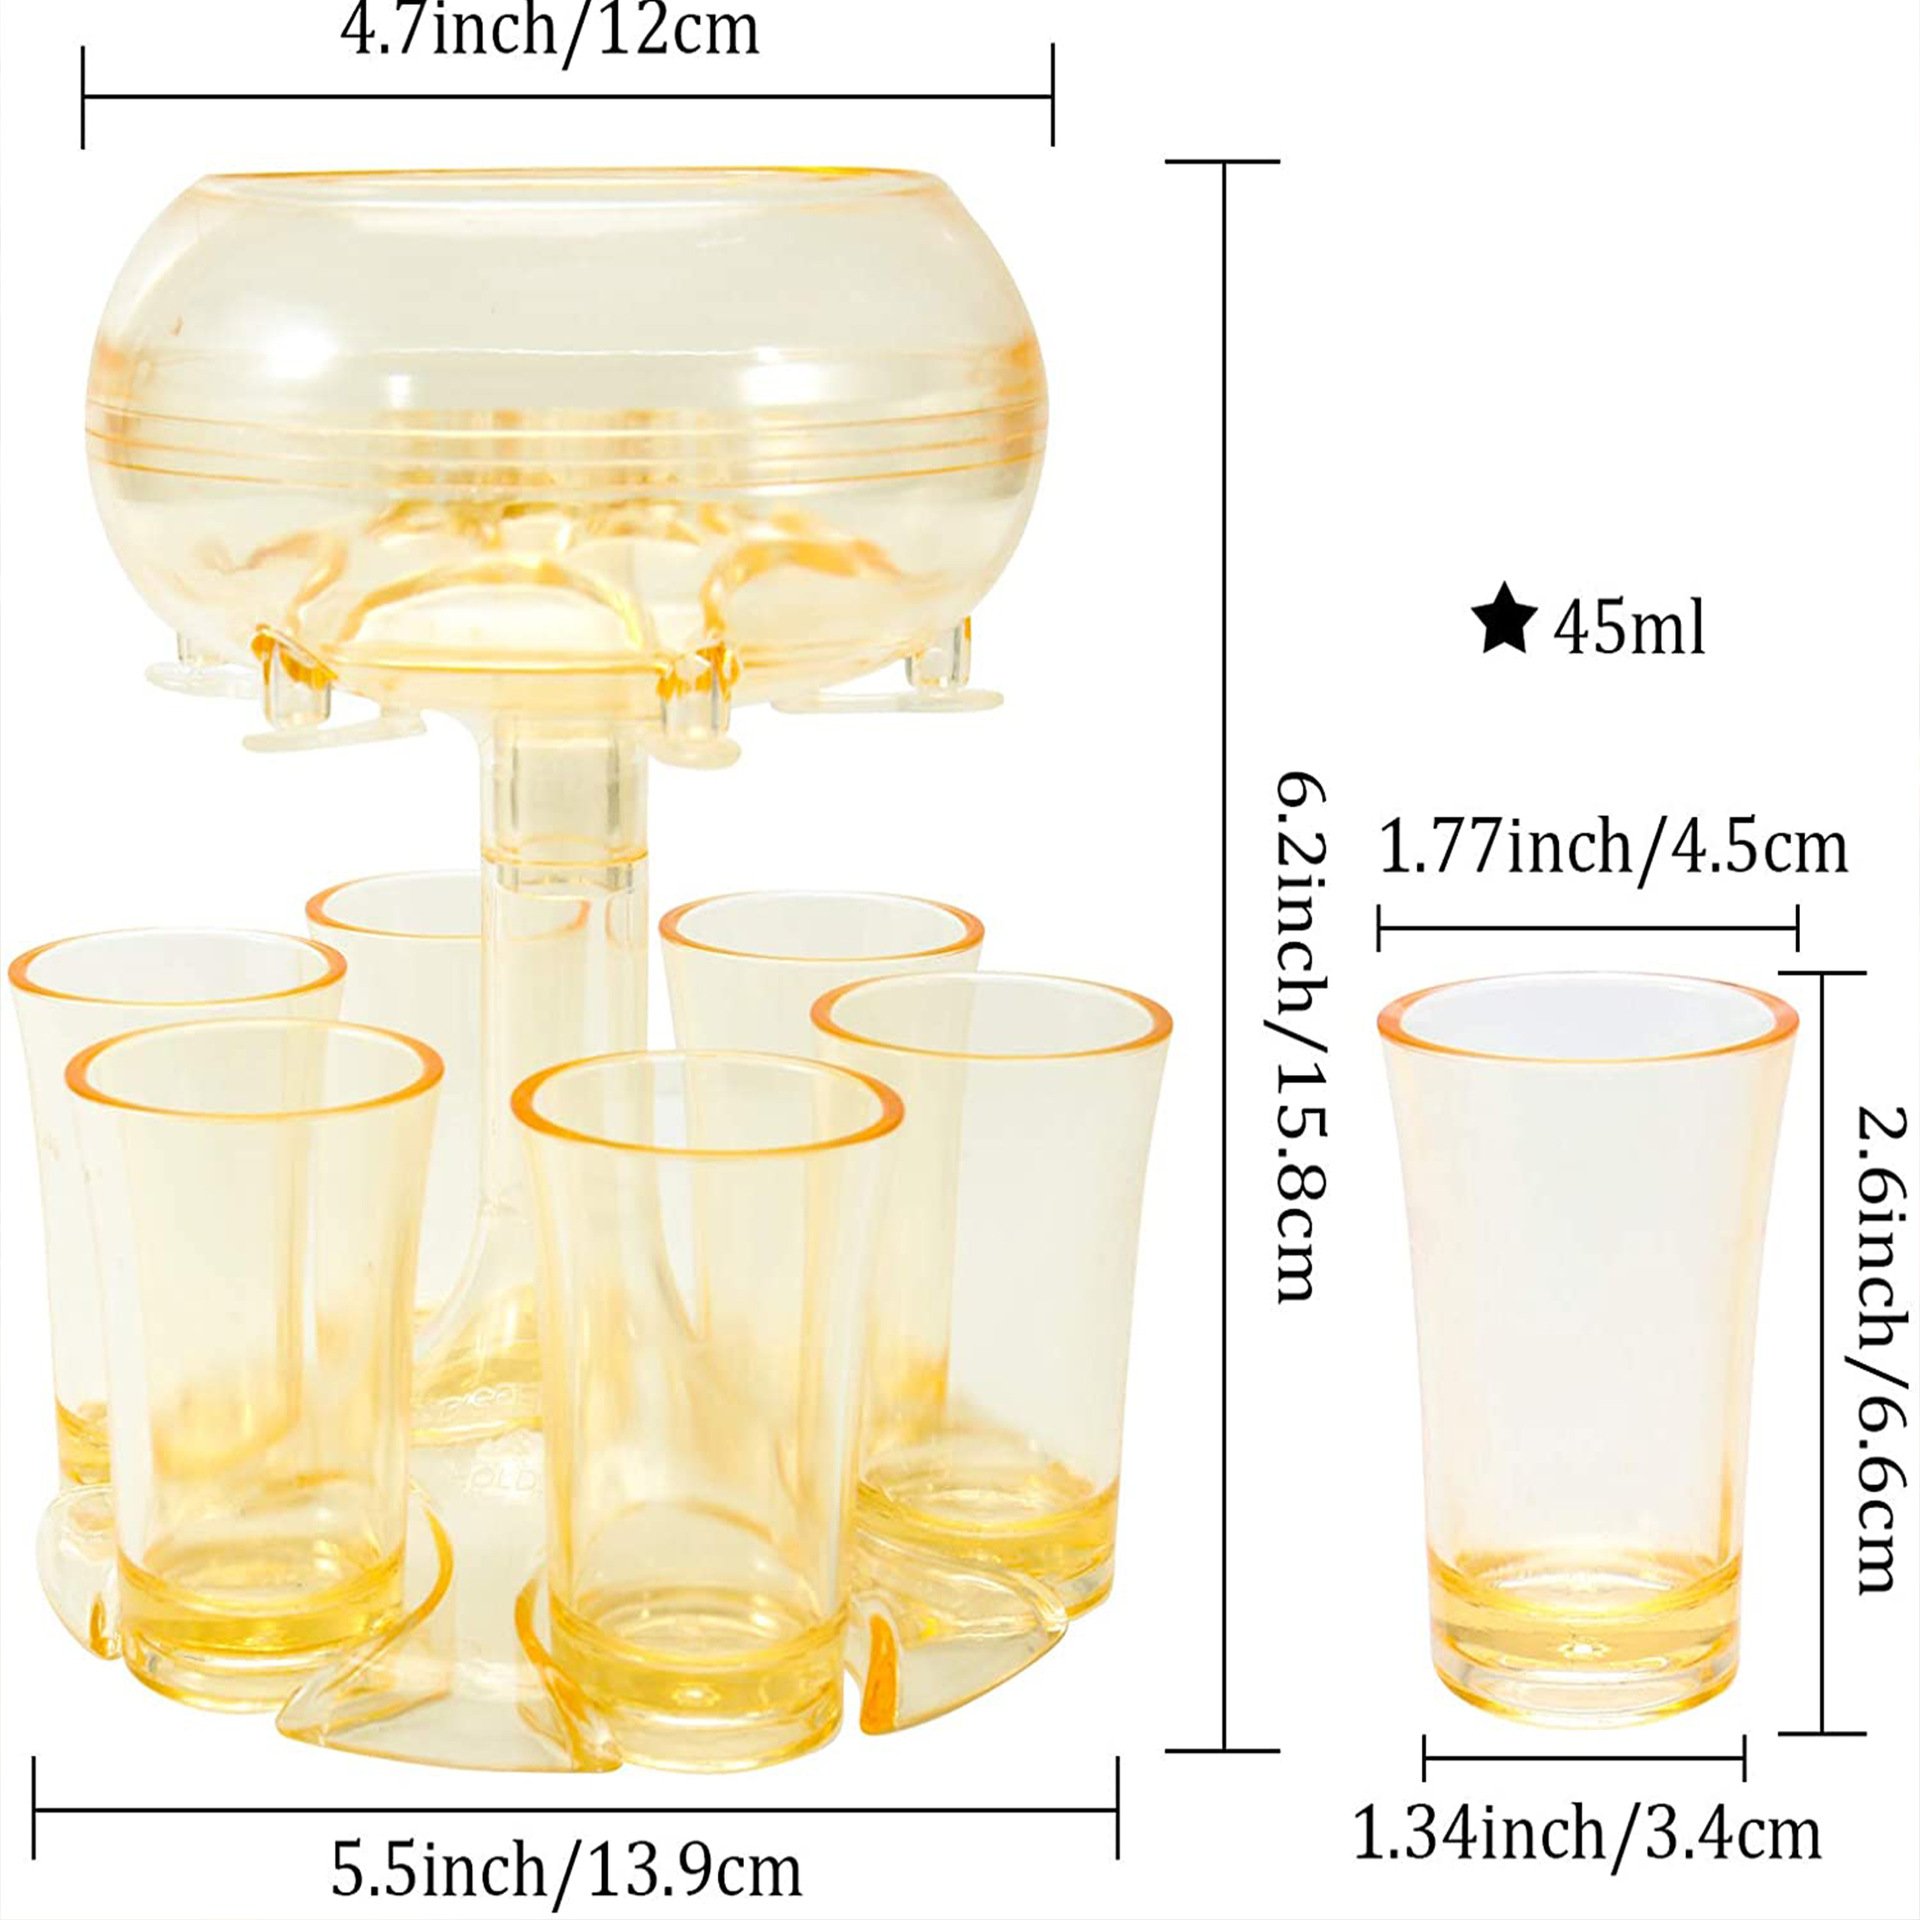 🥂New Year Sale 60% OFF🥂6 Shot Glass Dispenser and Holder - BUY 2 FREE SHIPPING